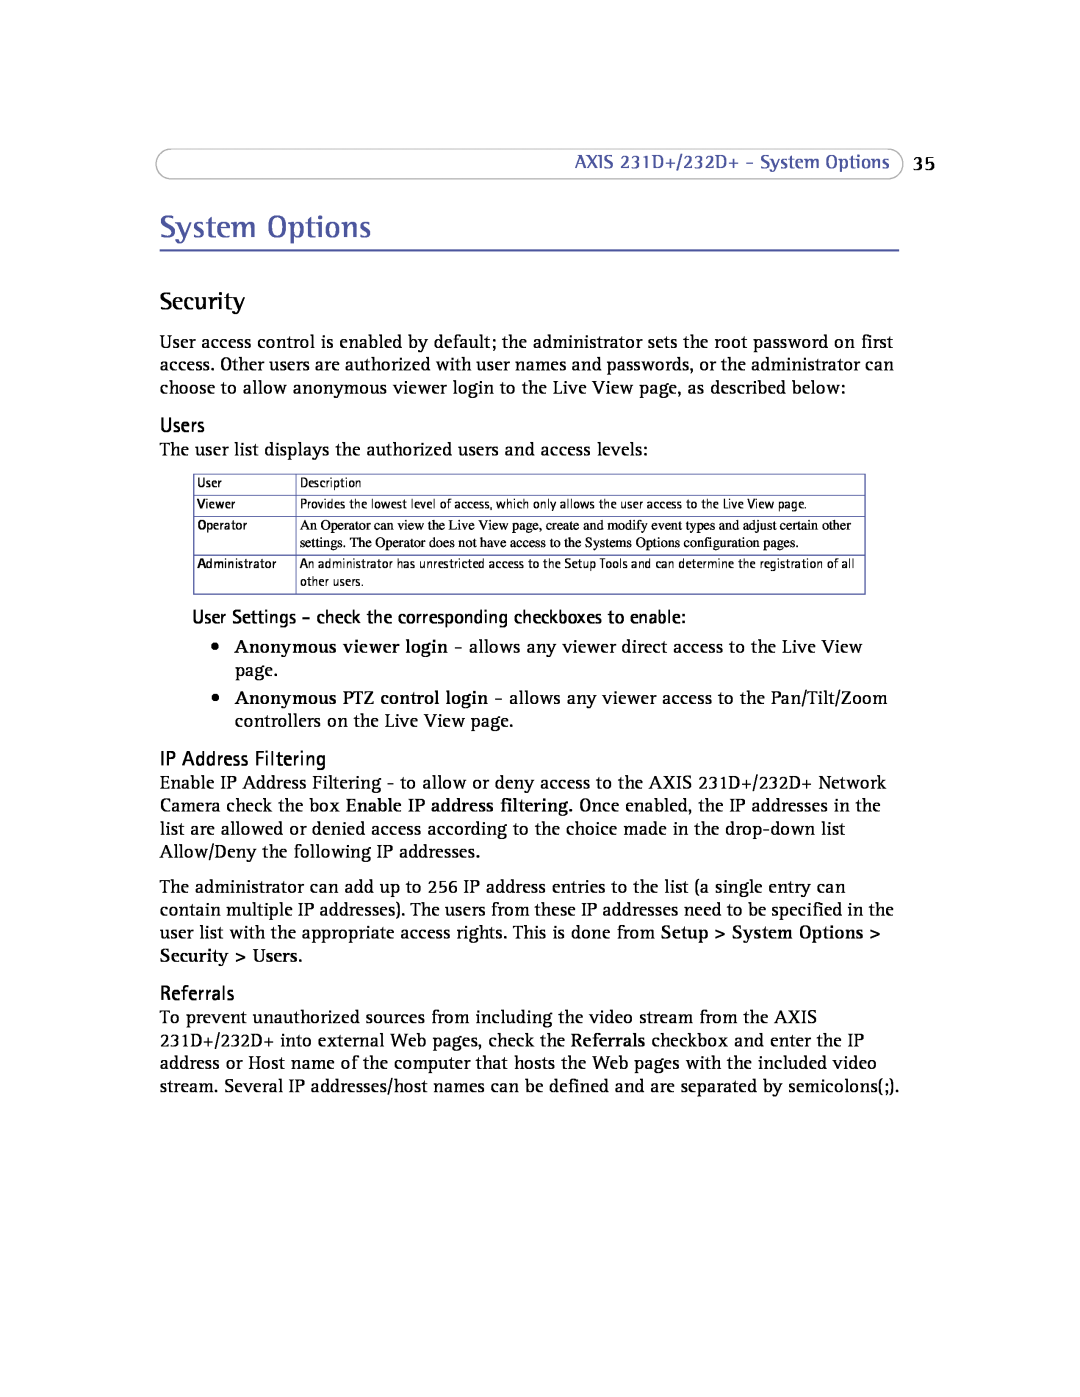 Axis Communications 232d+ user manual System Options, Security, Users, IP Address Filtering, Referrals 